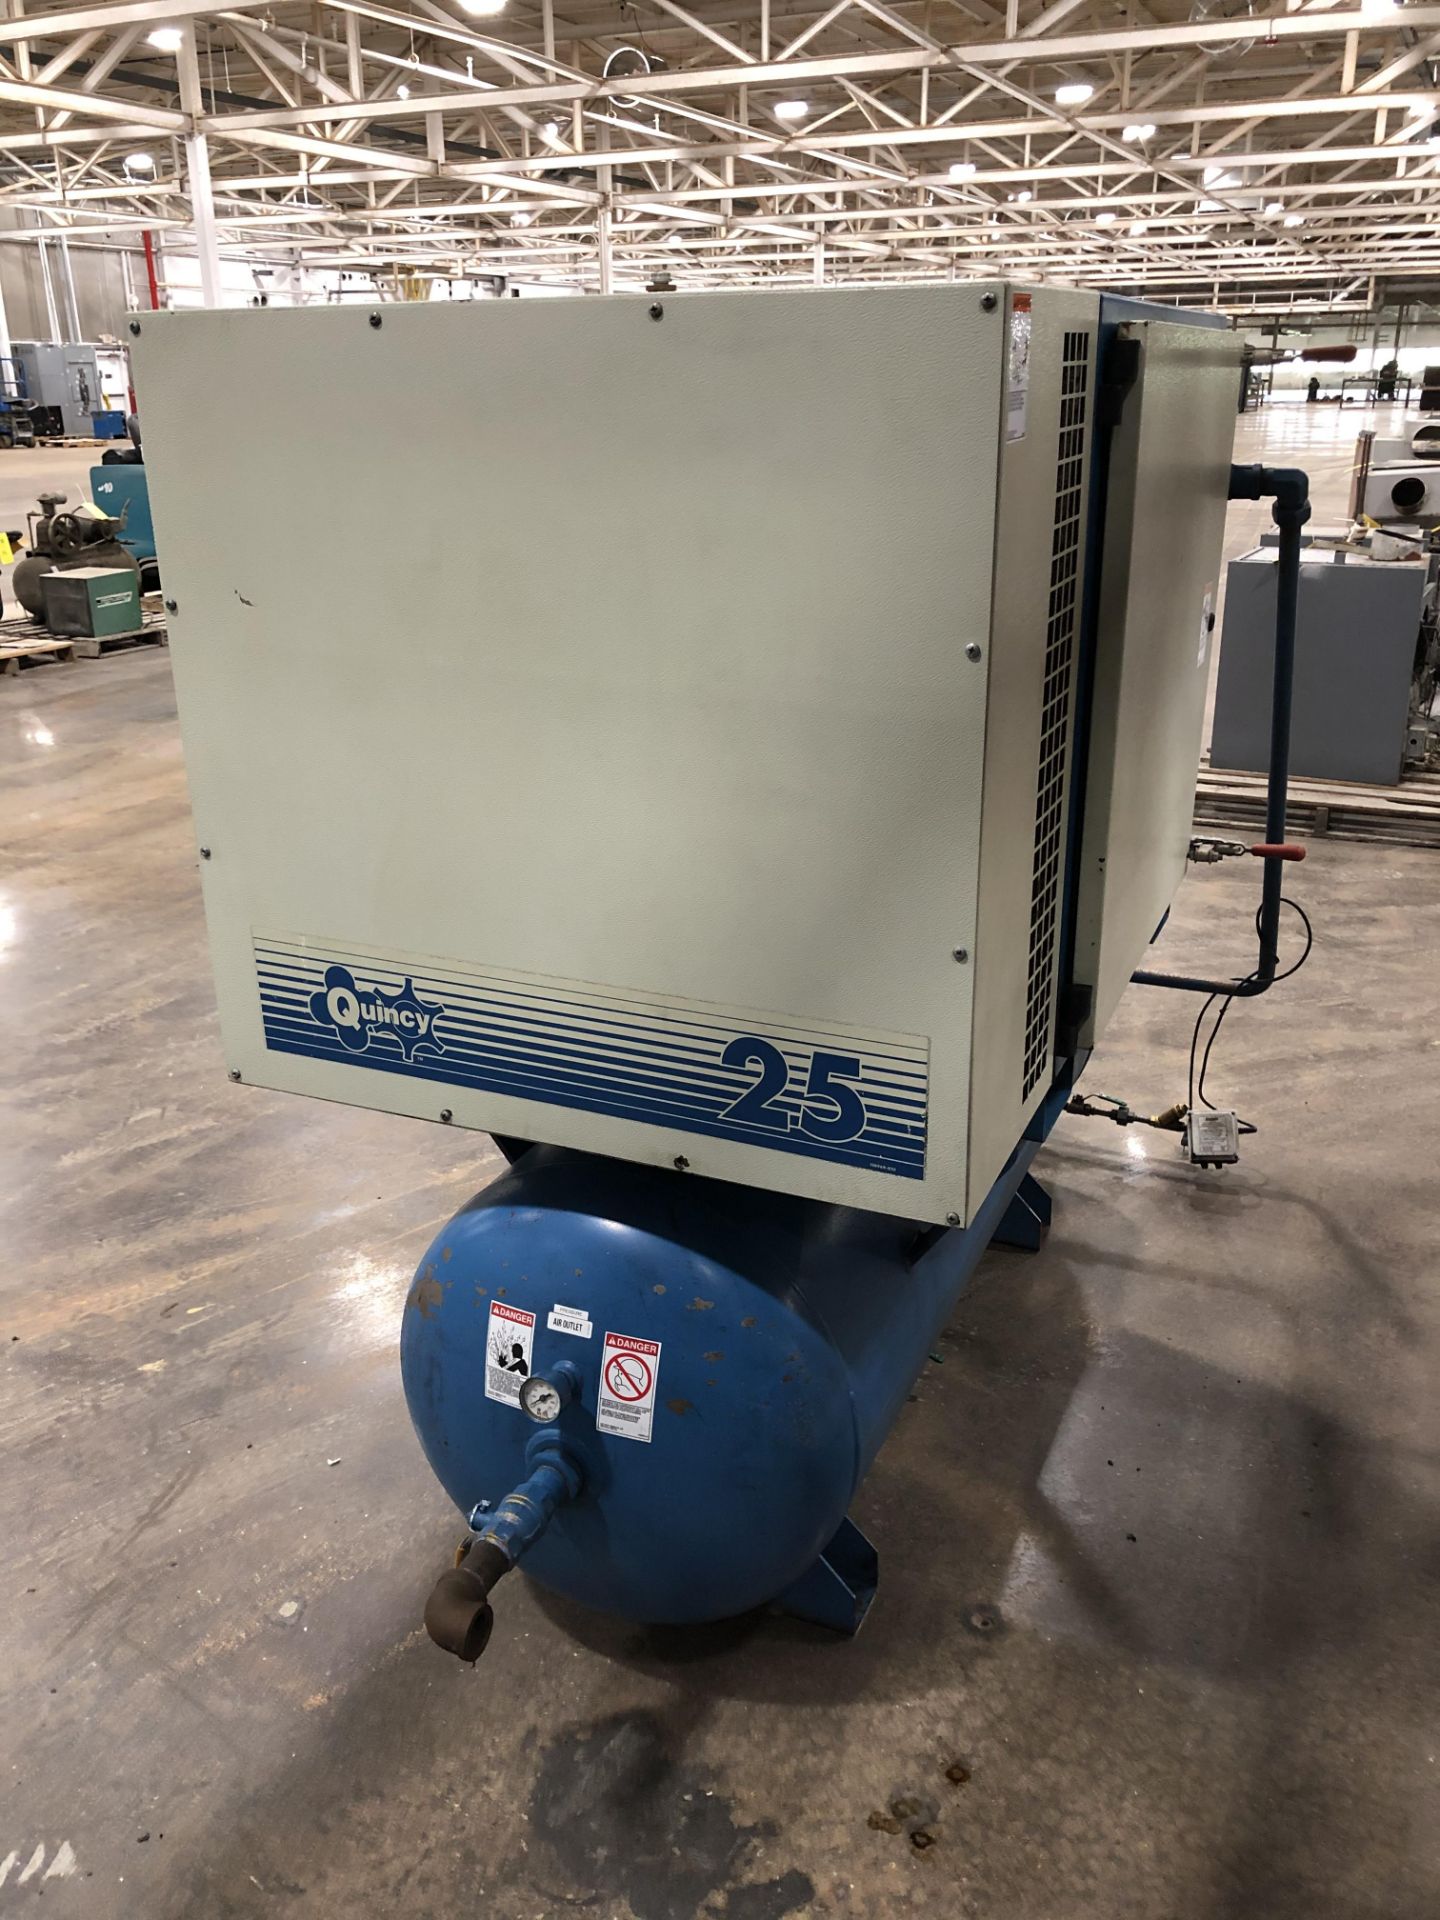 Quincy Air Compressor, 64,028.2 Hours, Rigging/ Loading Fee: $100 - Image 5 of 6